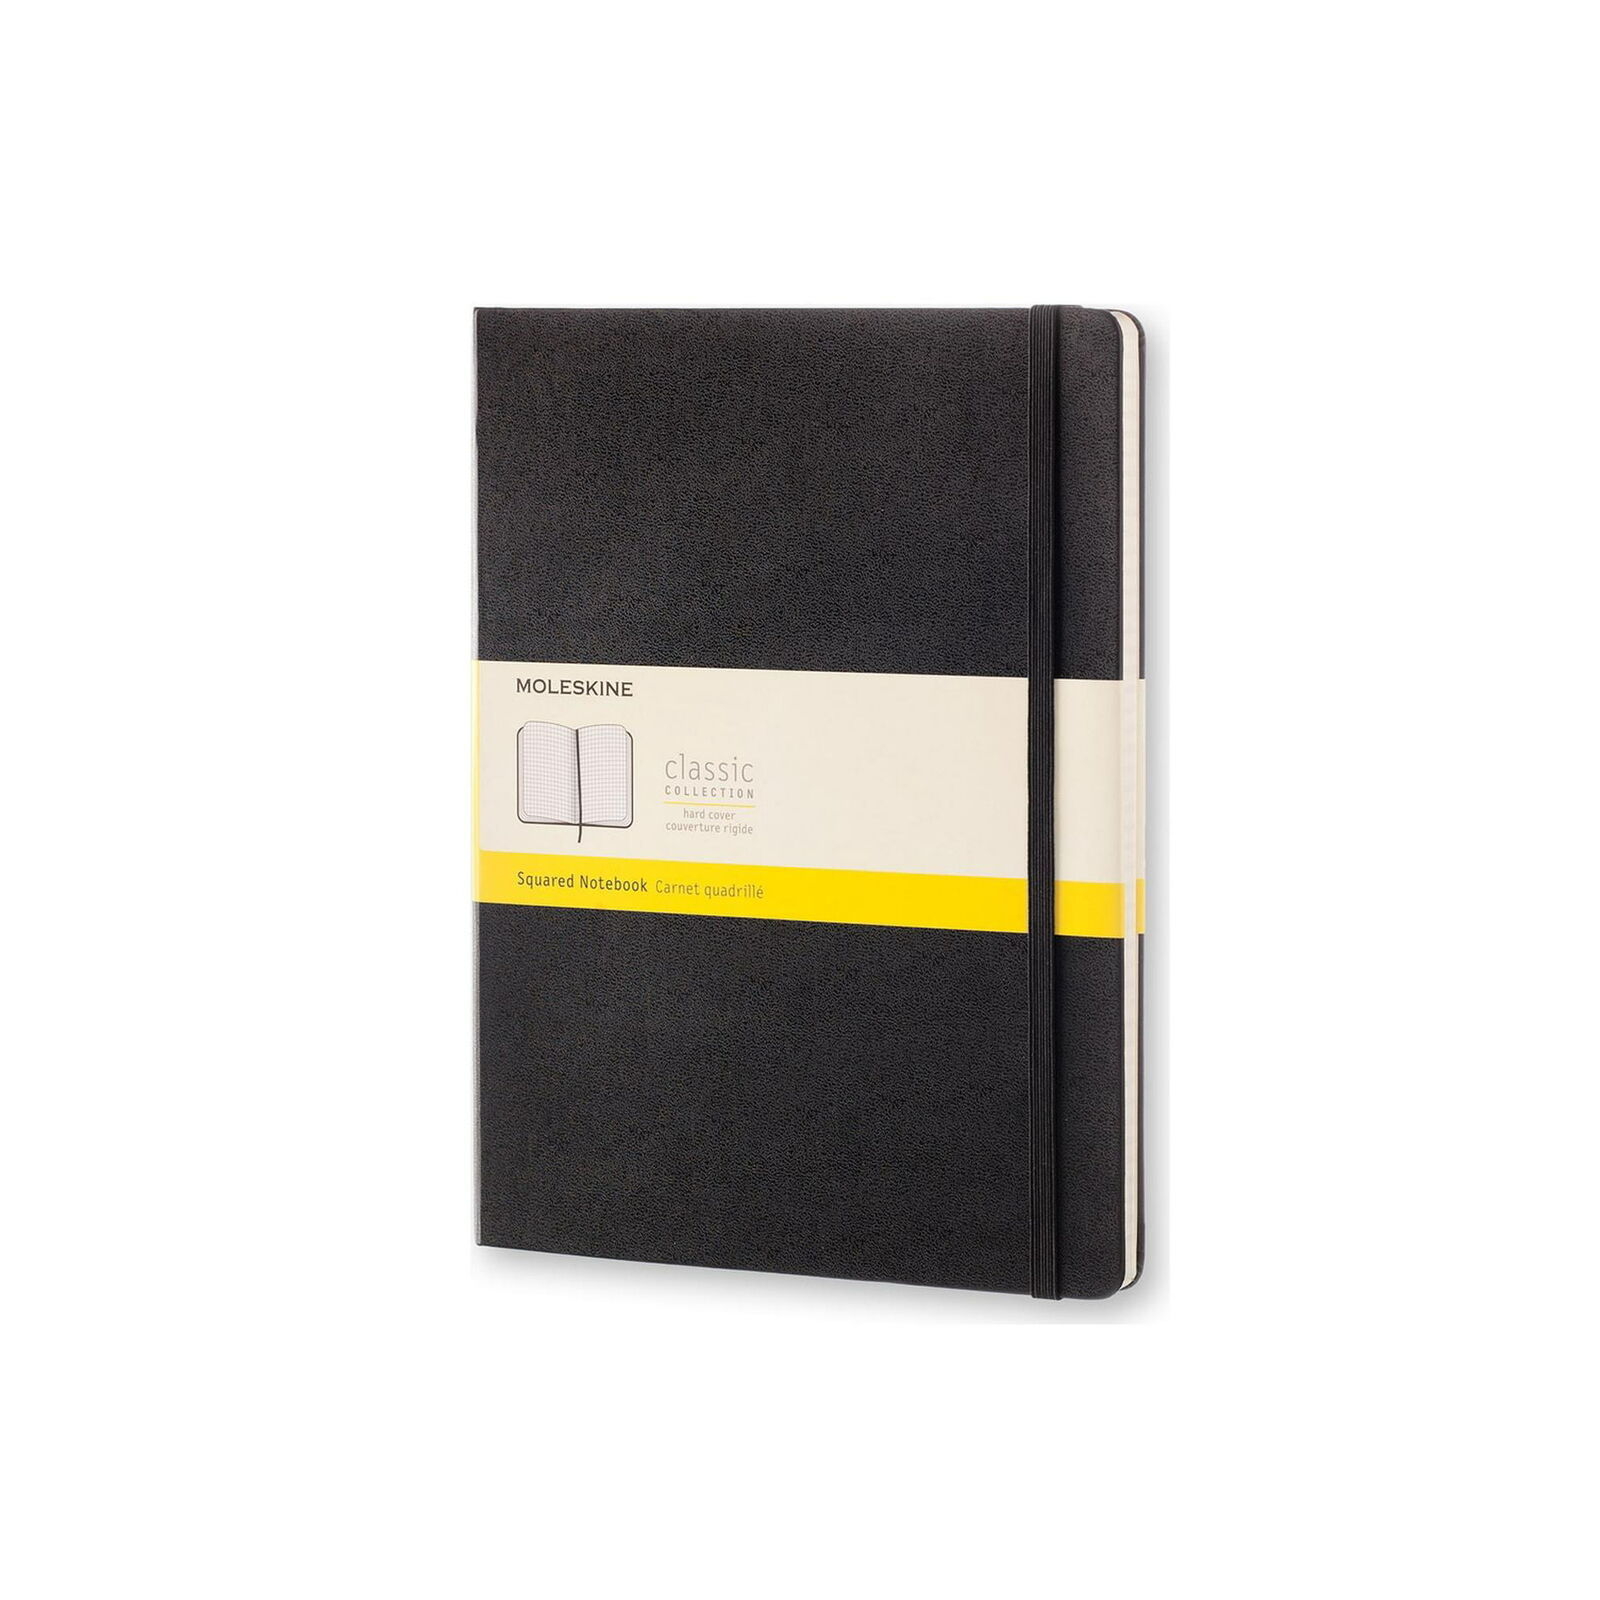 Primary image for Moleskine Classic Notebook, Extra Large, Squared, Black, Hard Cover (7.5 X 10)